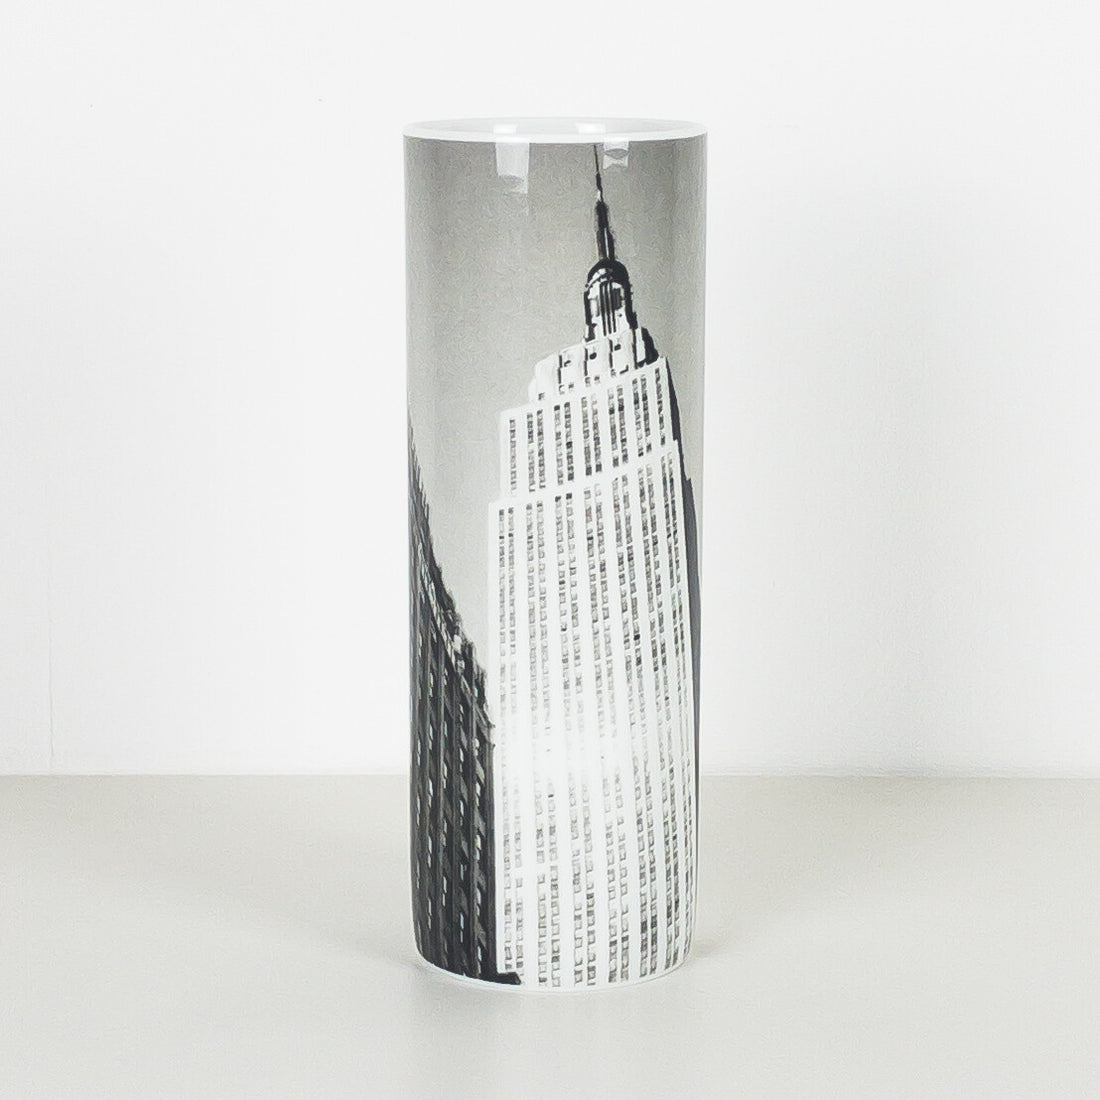 ROSENTHAL - Andy Warhol Empire State Building NY Vaso 26cm (1928 - 1987)